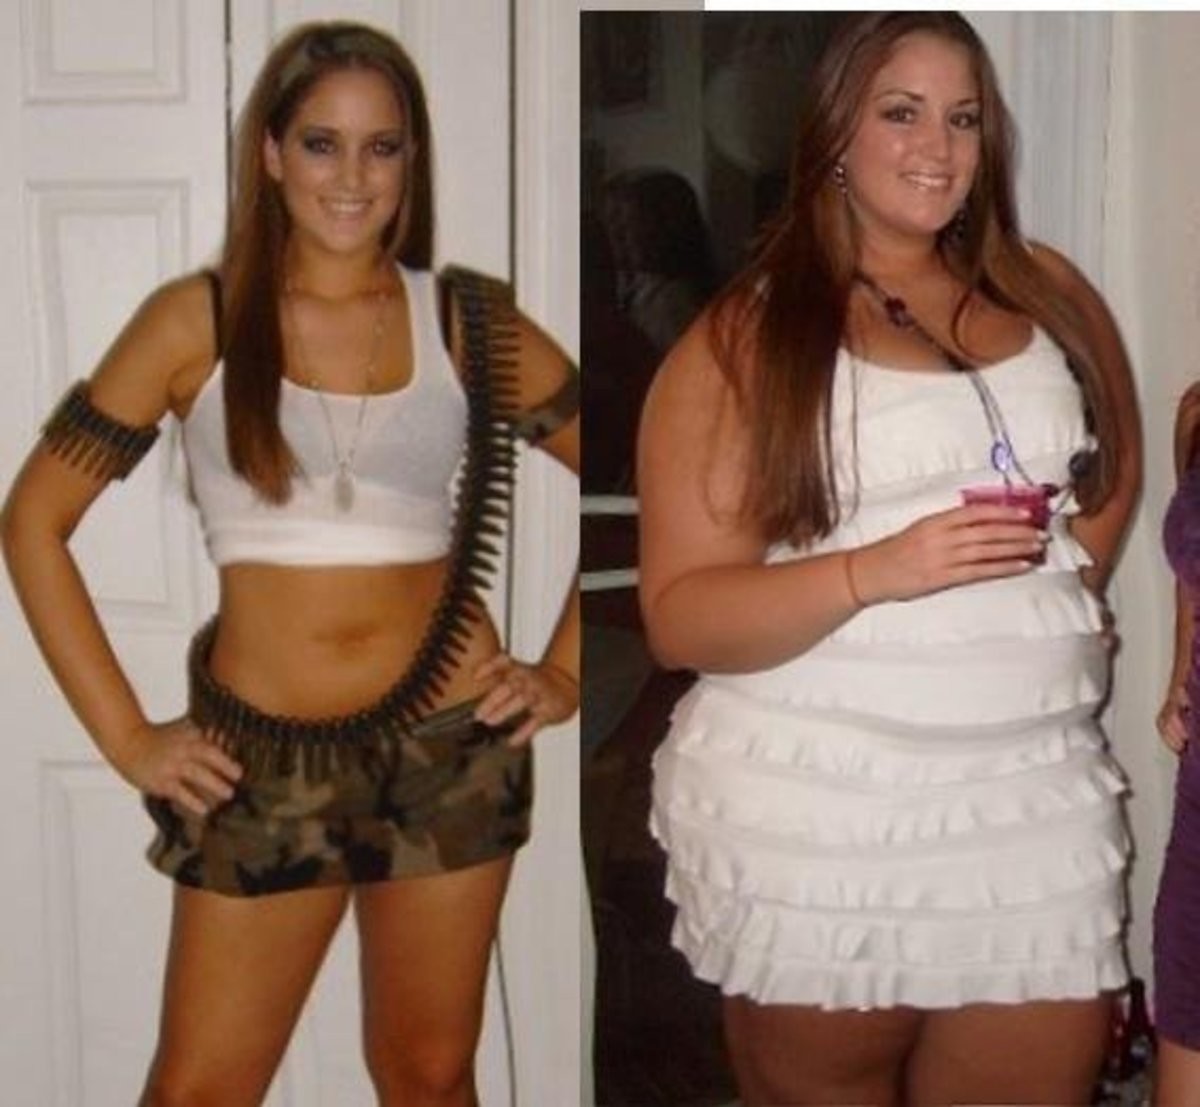 She wasn't skinny in the first photo and I'd still hit the fat ve...